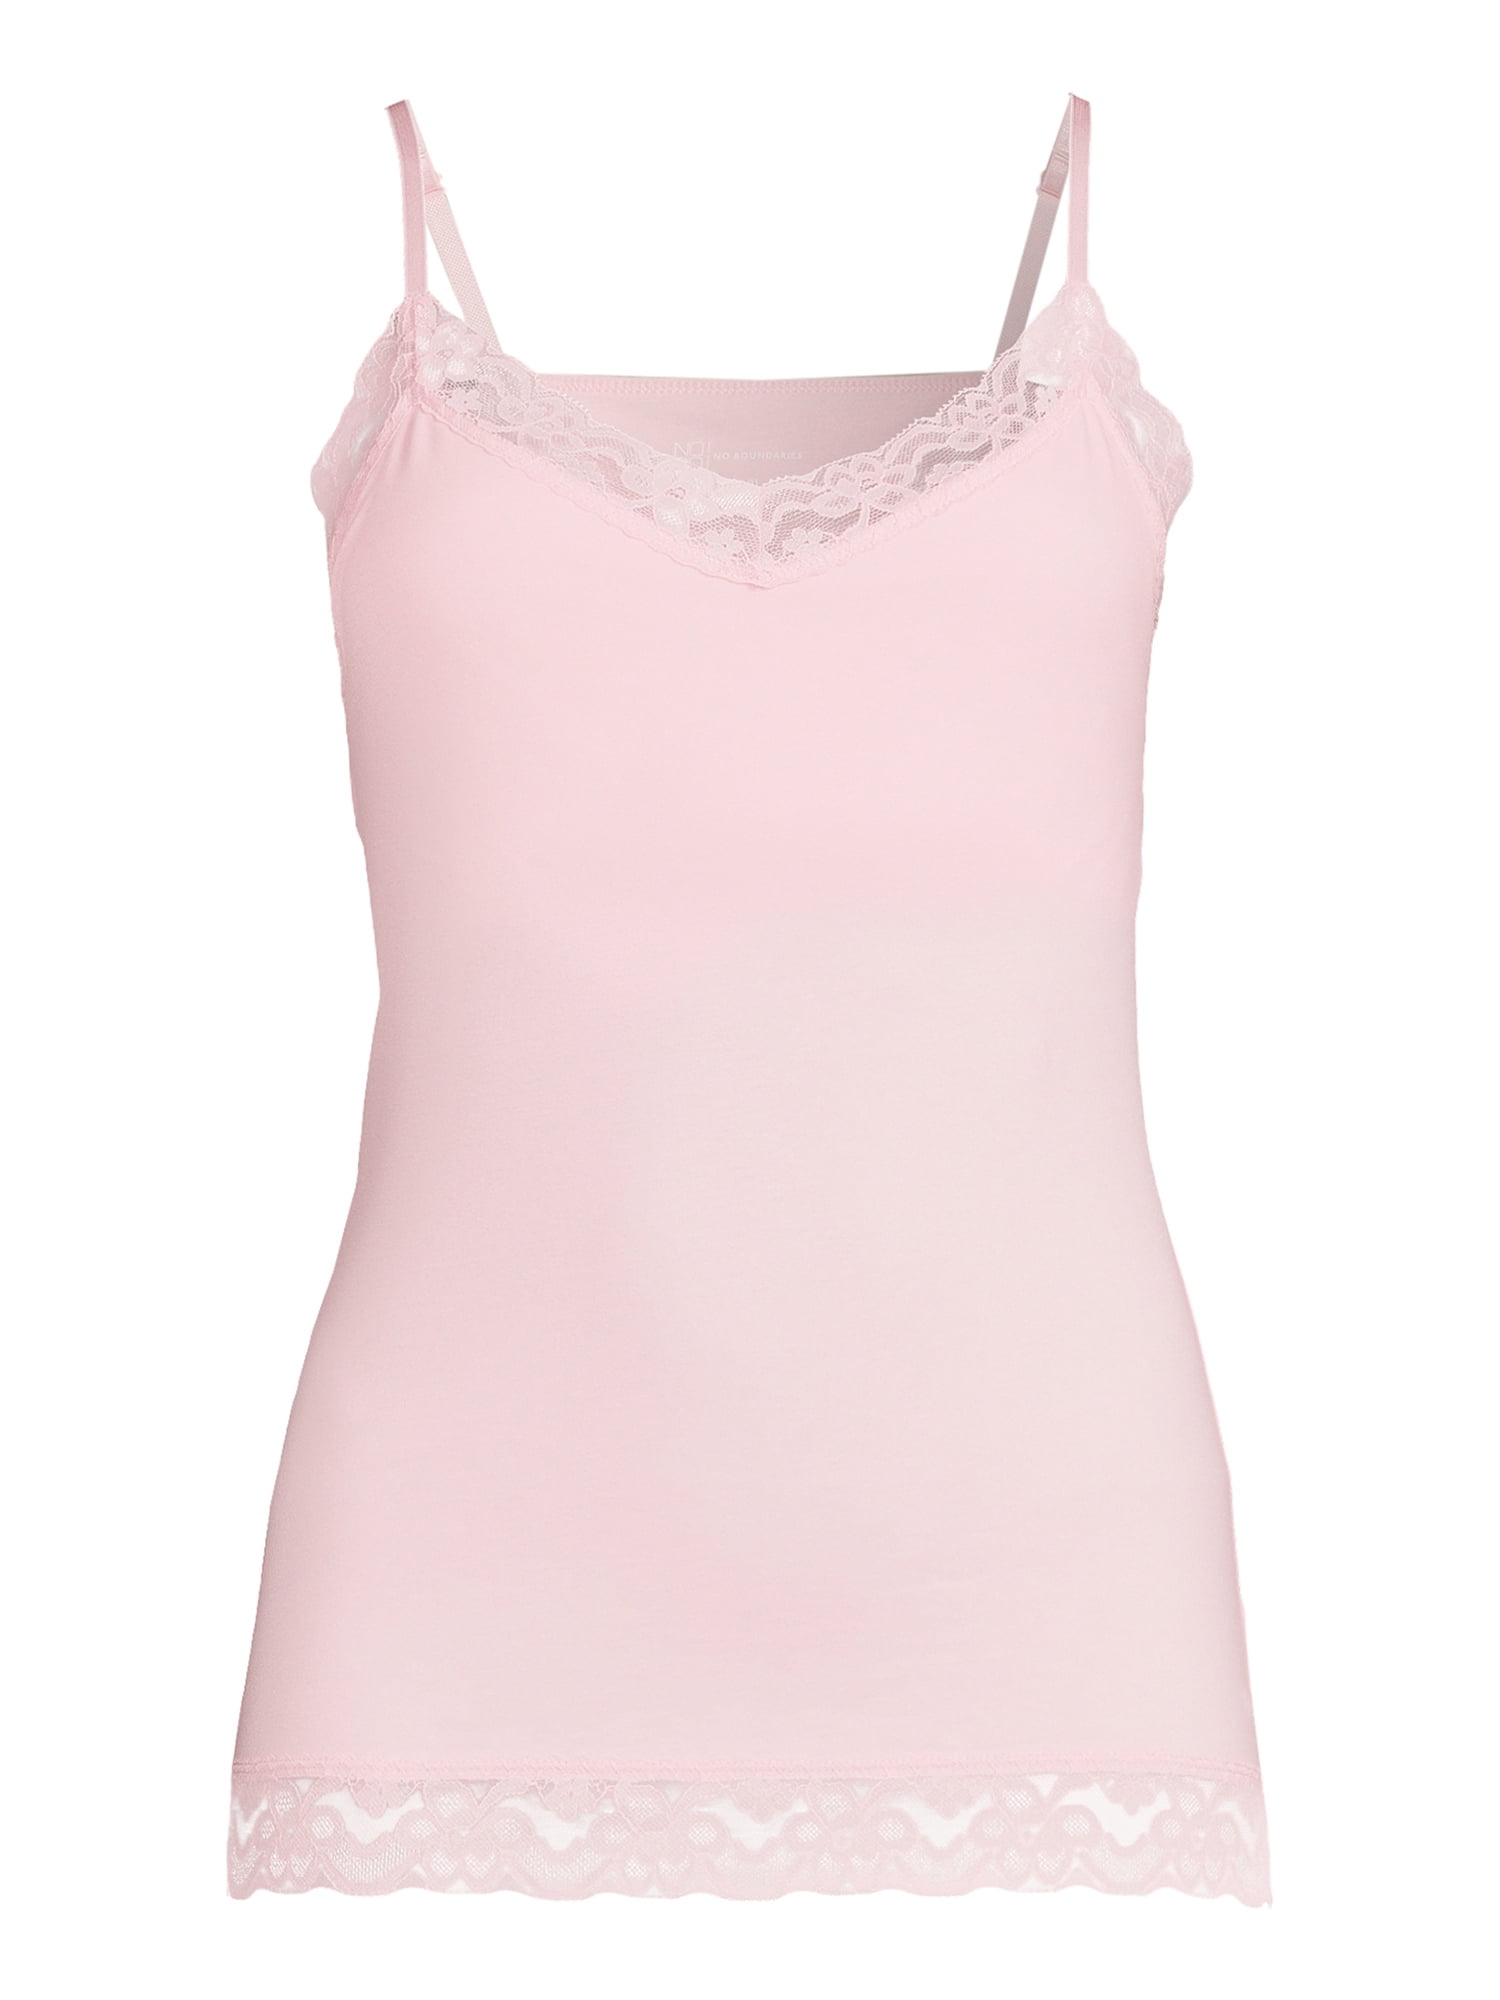 FRENCHI JUNIORS WOMENS LACE TRIM CAMISOLE TANK TOP PINK SHELL MEDIUM NEW!  $24